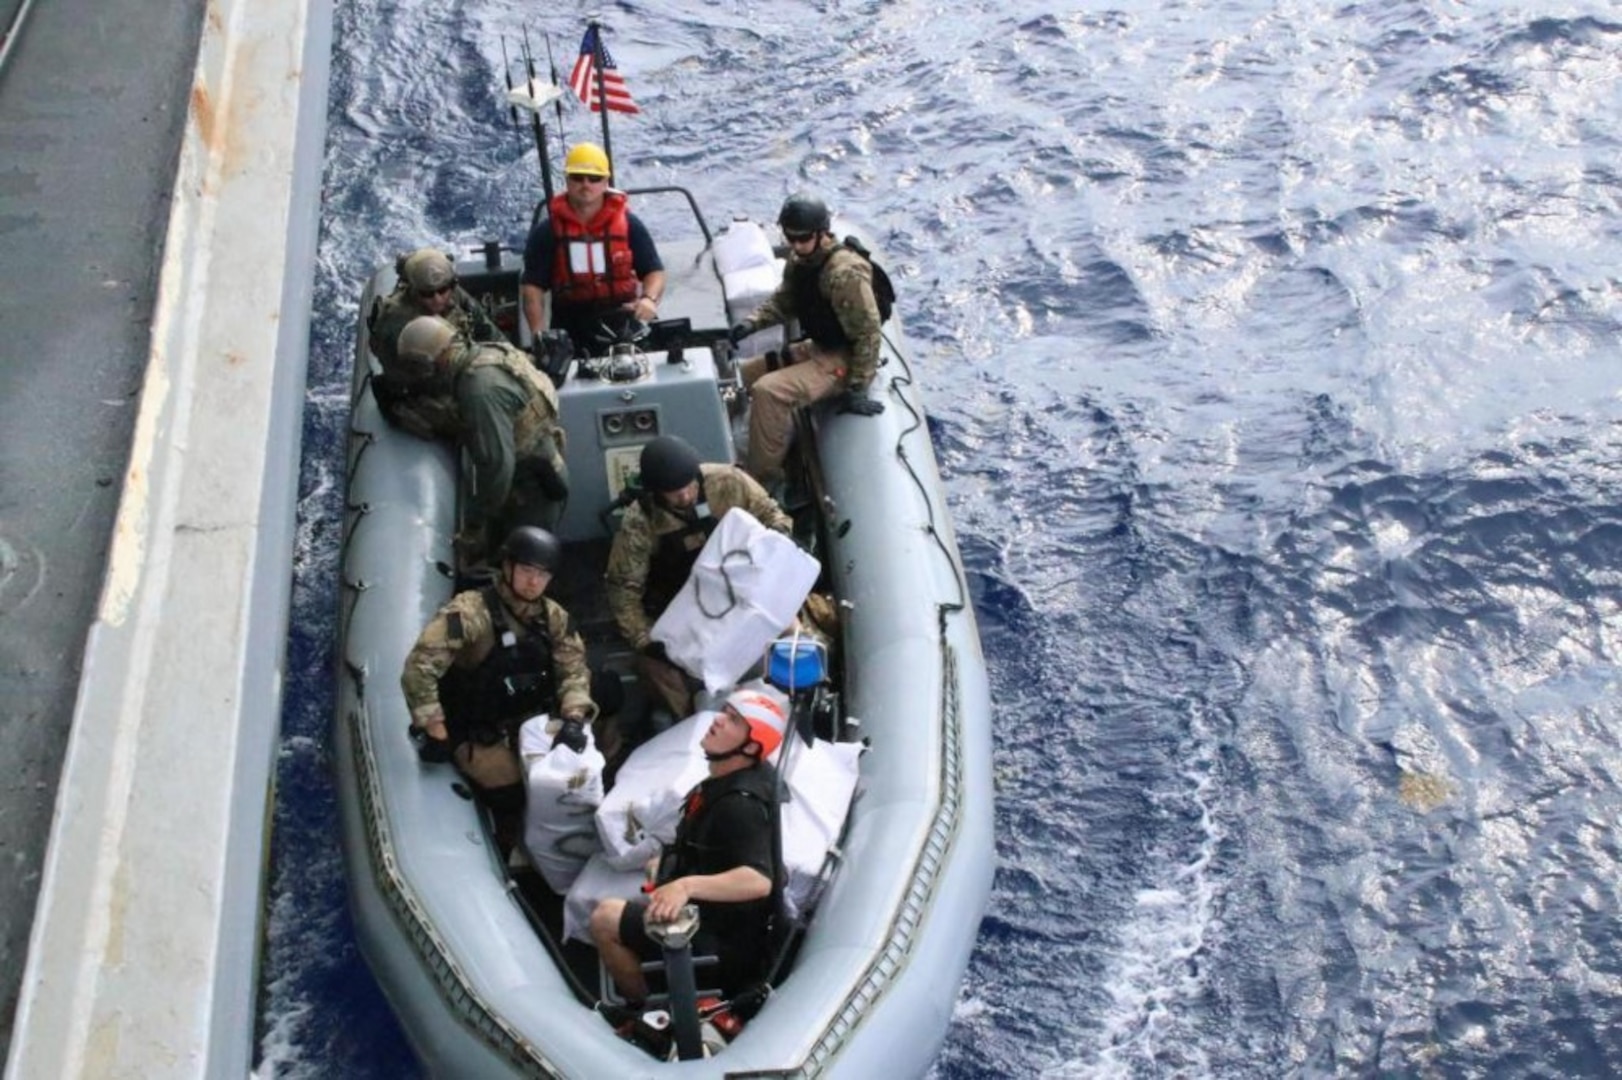 Military personnel in a boat alongside a ship.